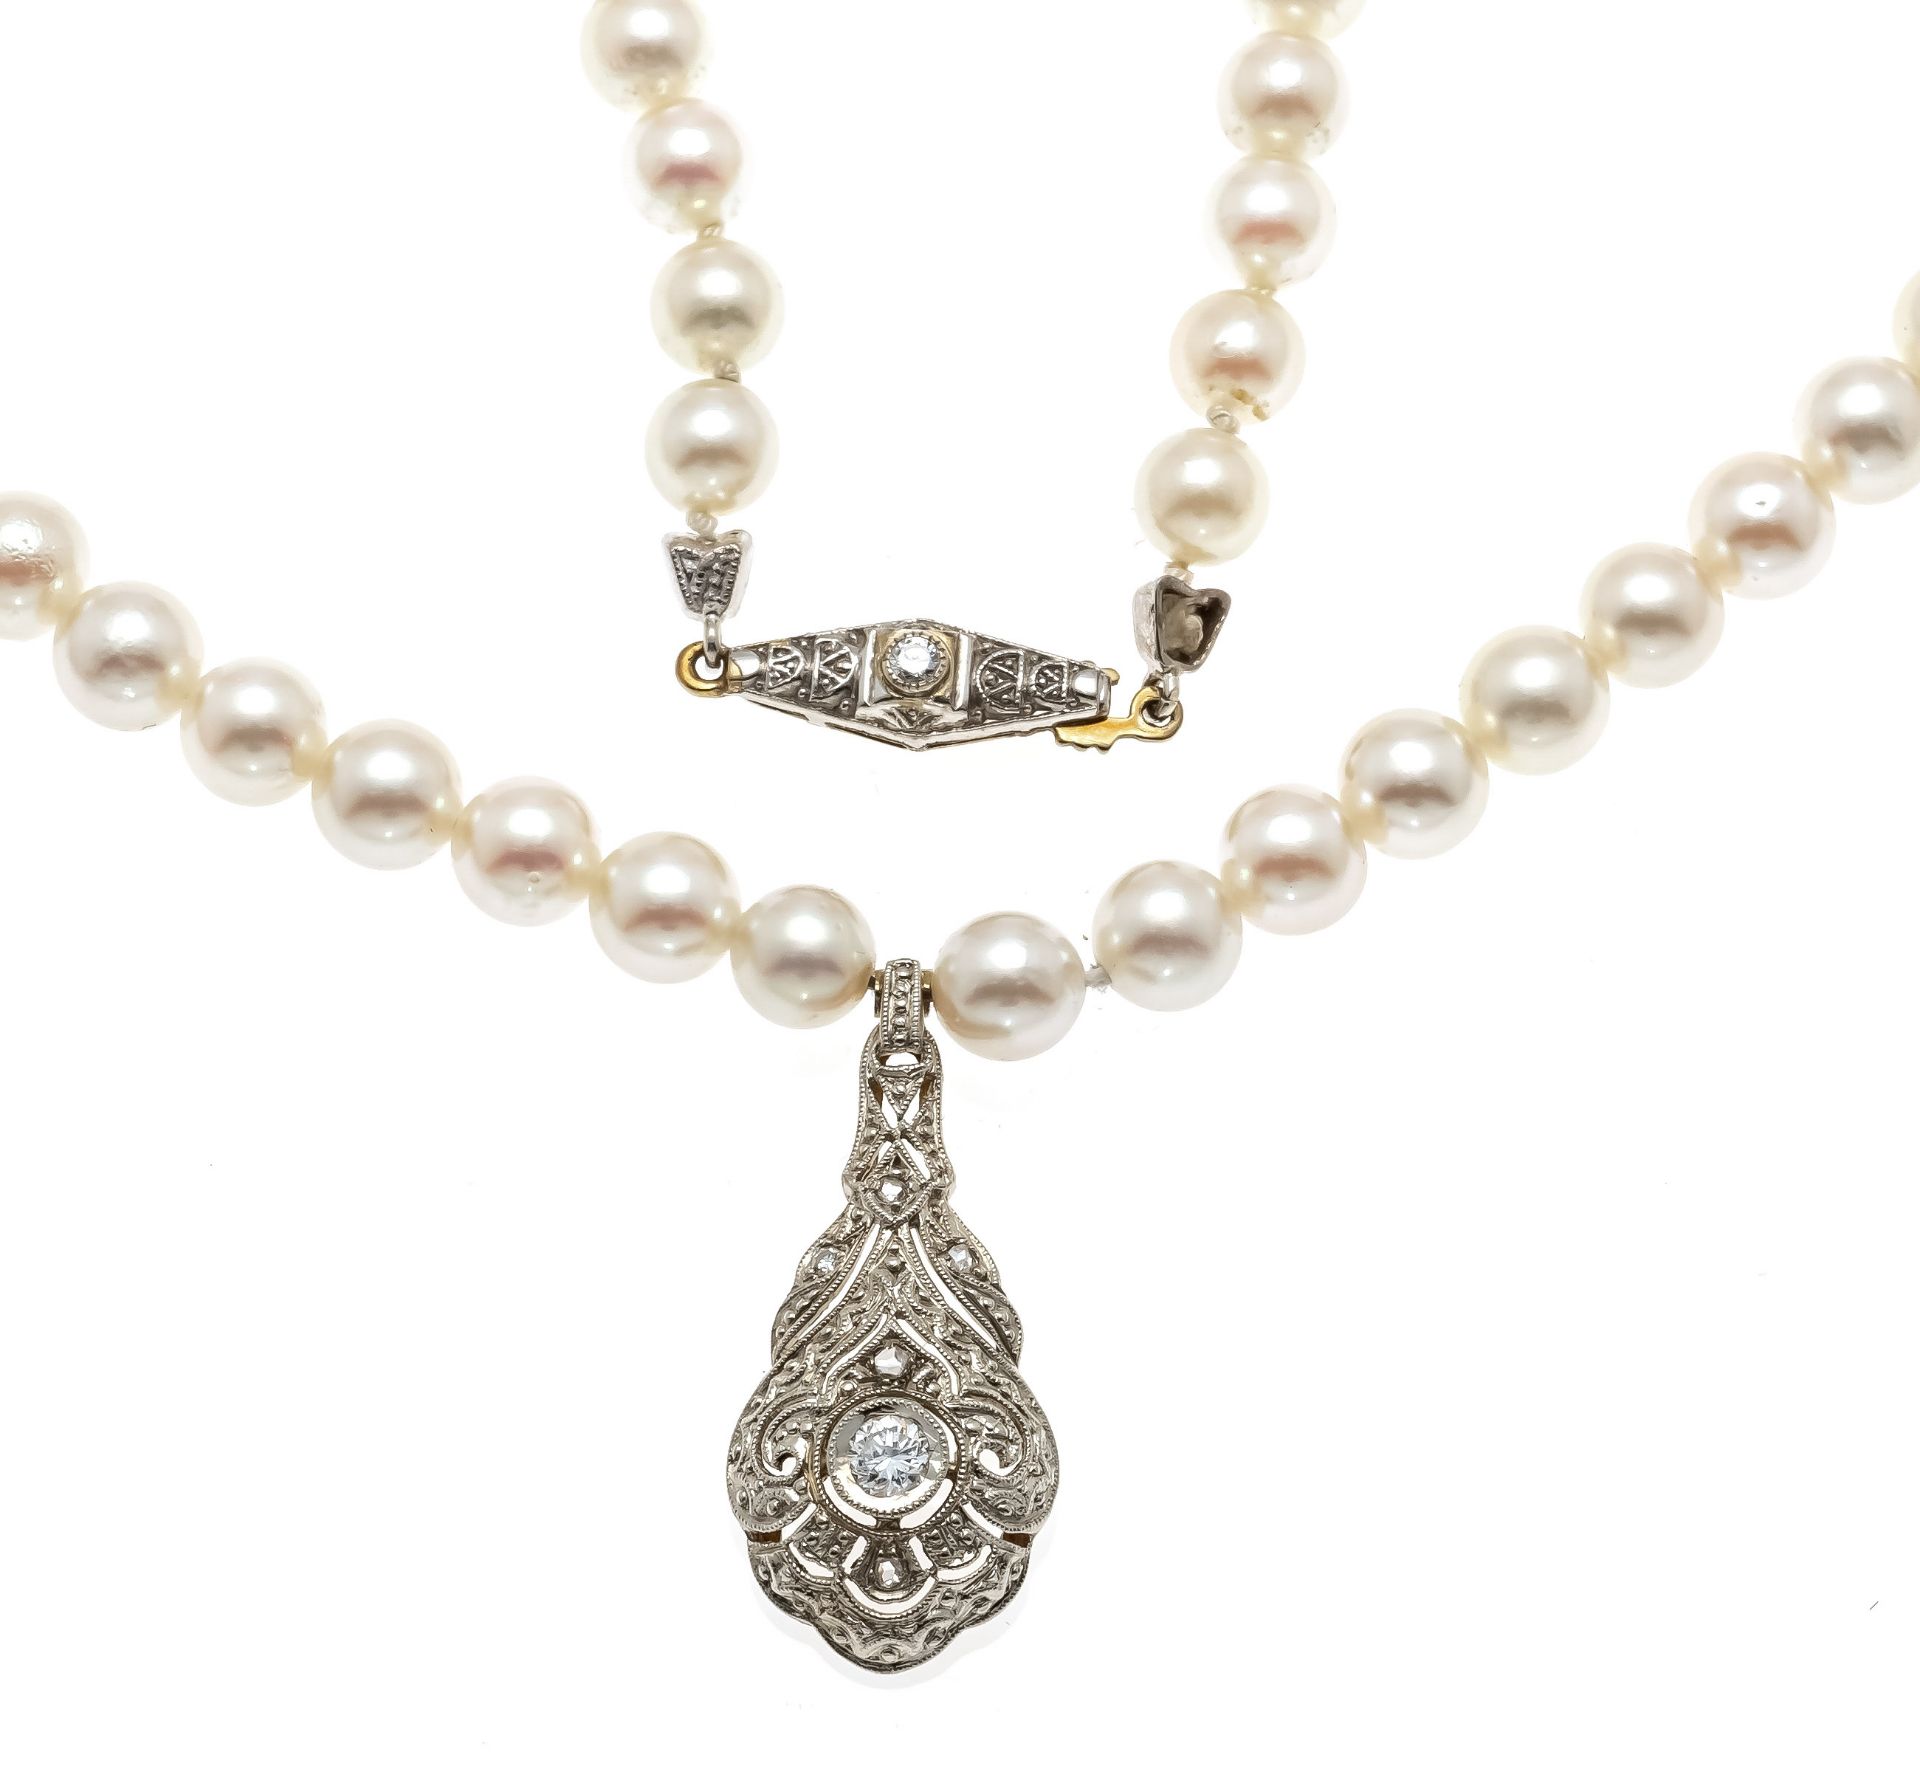 Akoya pearl necklace in Art Deco style with pendant and pin clasp GG/WG 333/000 set with 2